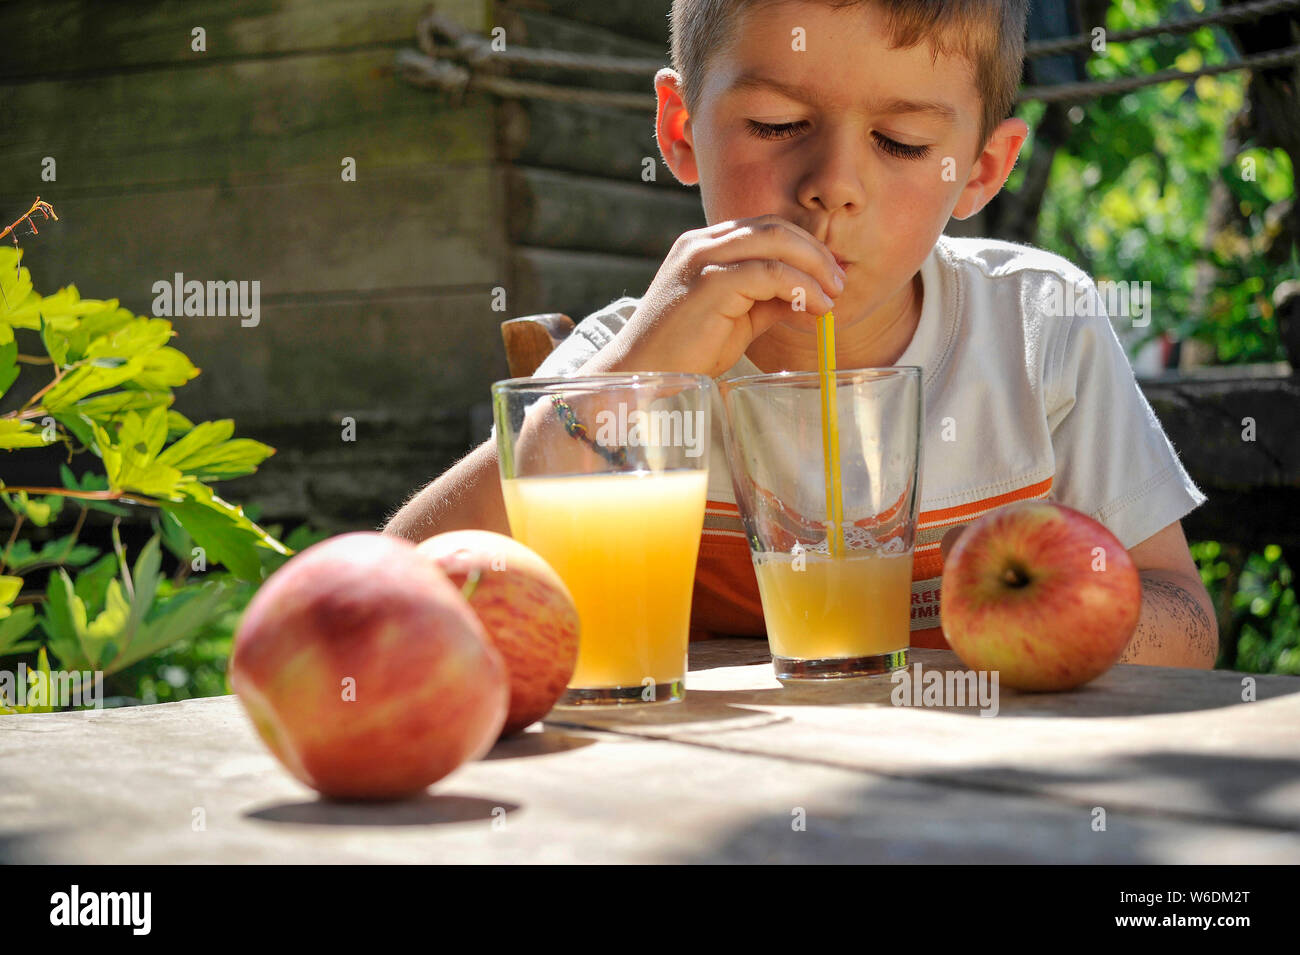 Boy drinking a fruit juice with a straw. NOTICE: Authorization for any editorial use respecting the caption and context of the image and not infringin Stock Photo